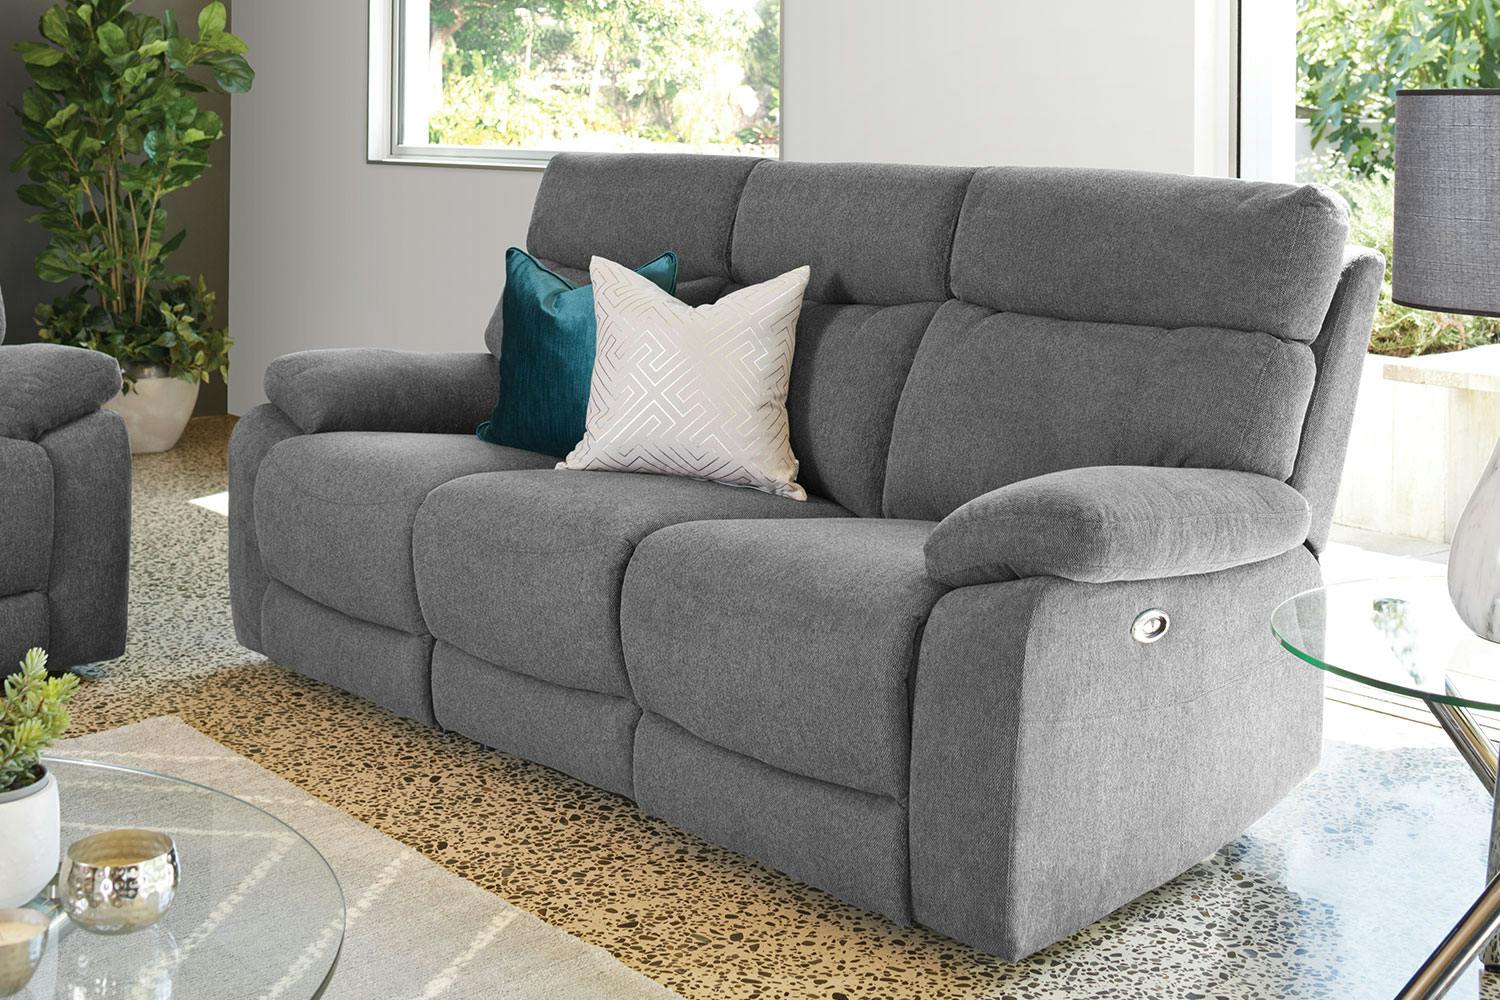 3 seater fabric sofa bed for sale